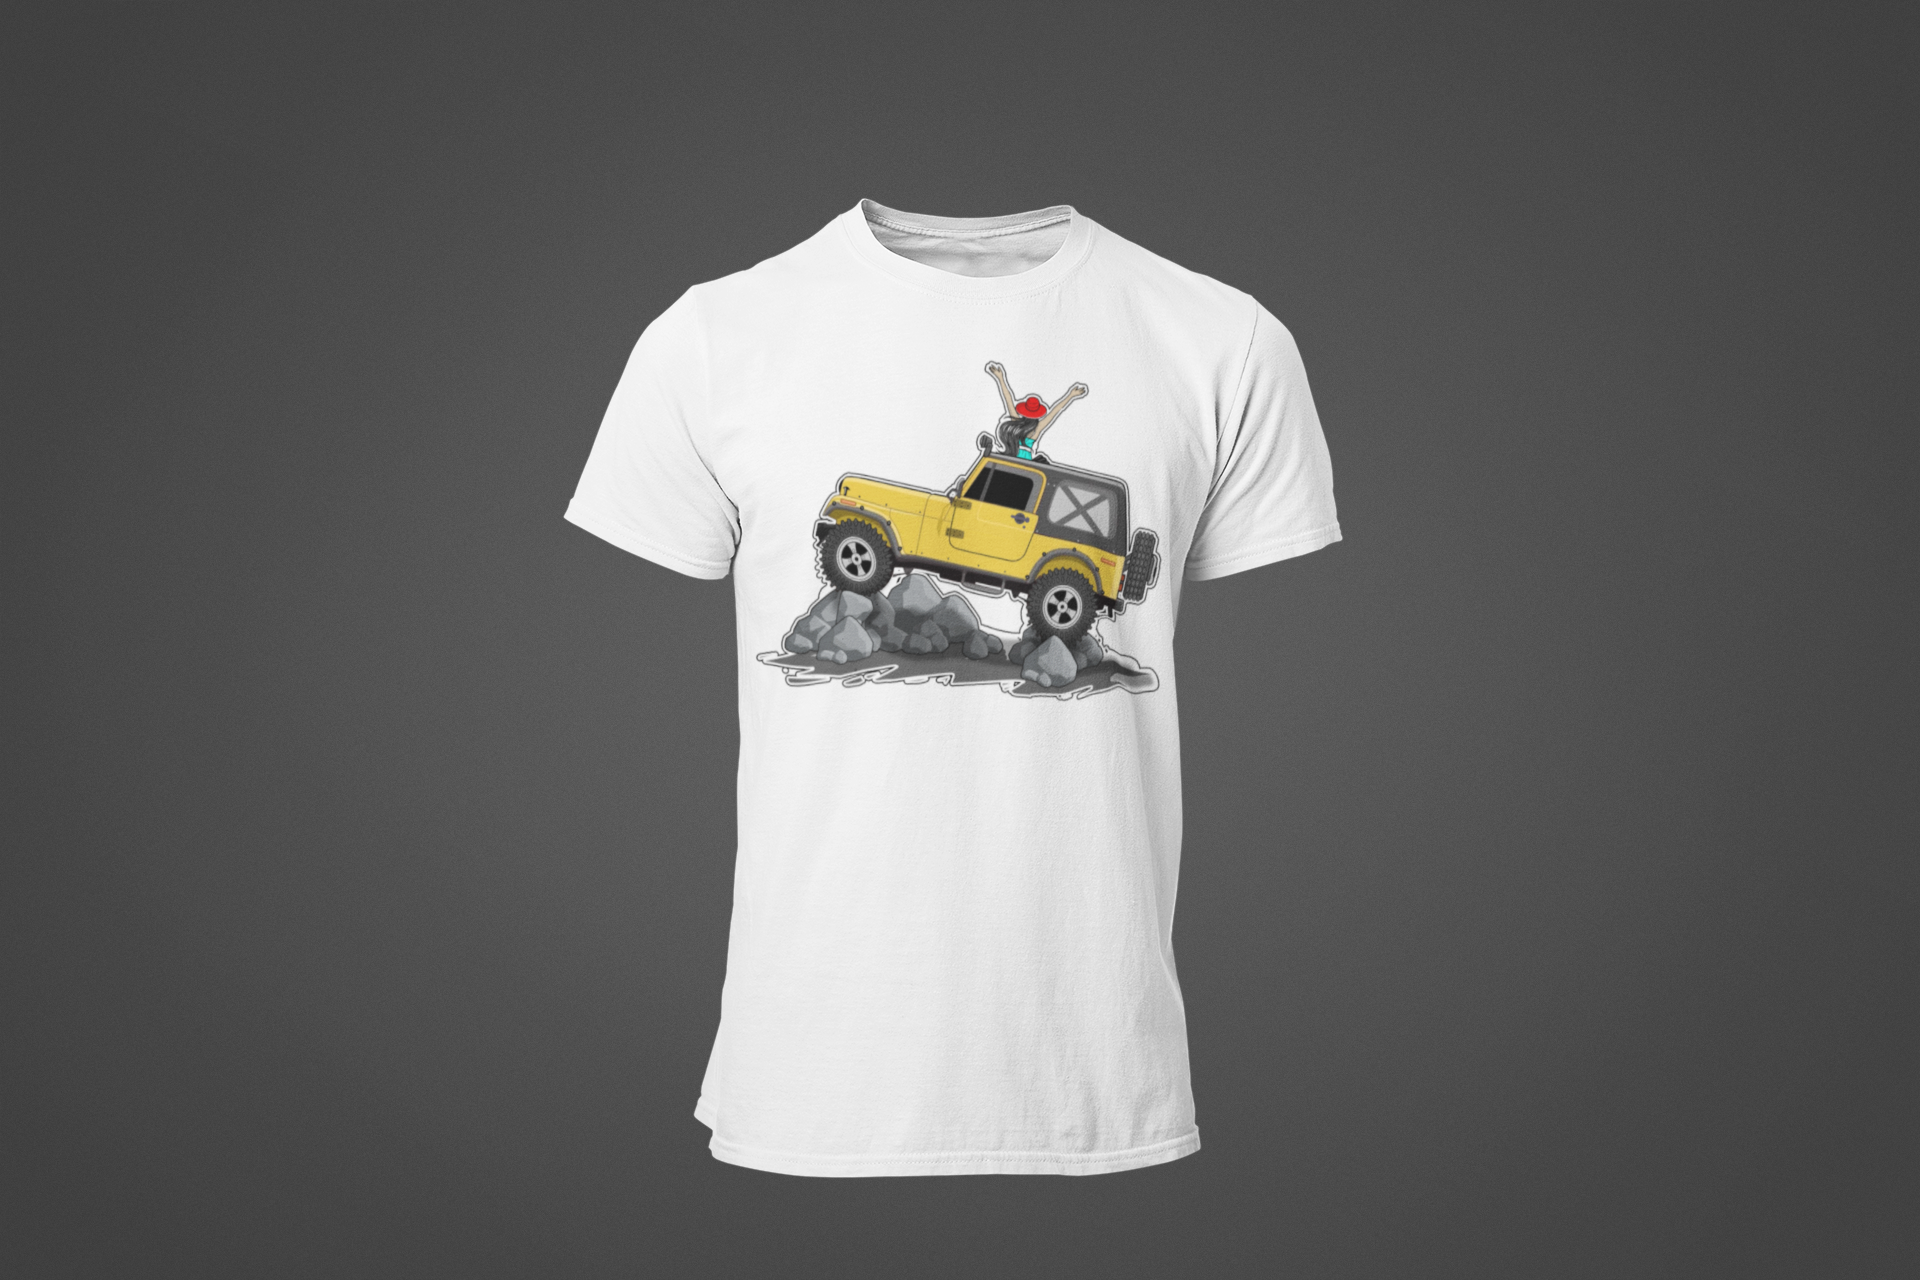 A white tee shirt with the image of a Jeep Gladiator climbing a mountain.